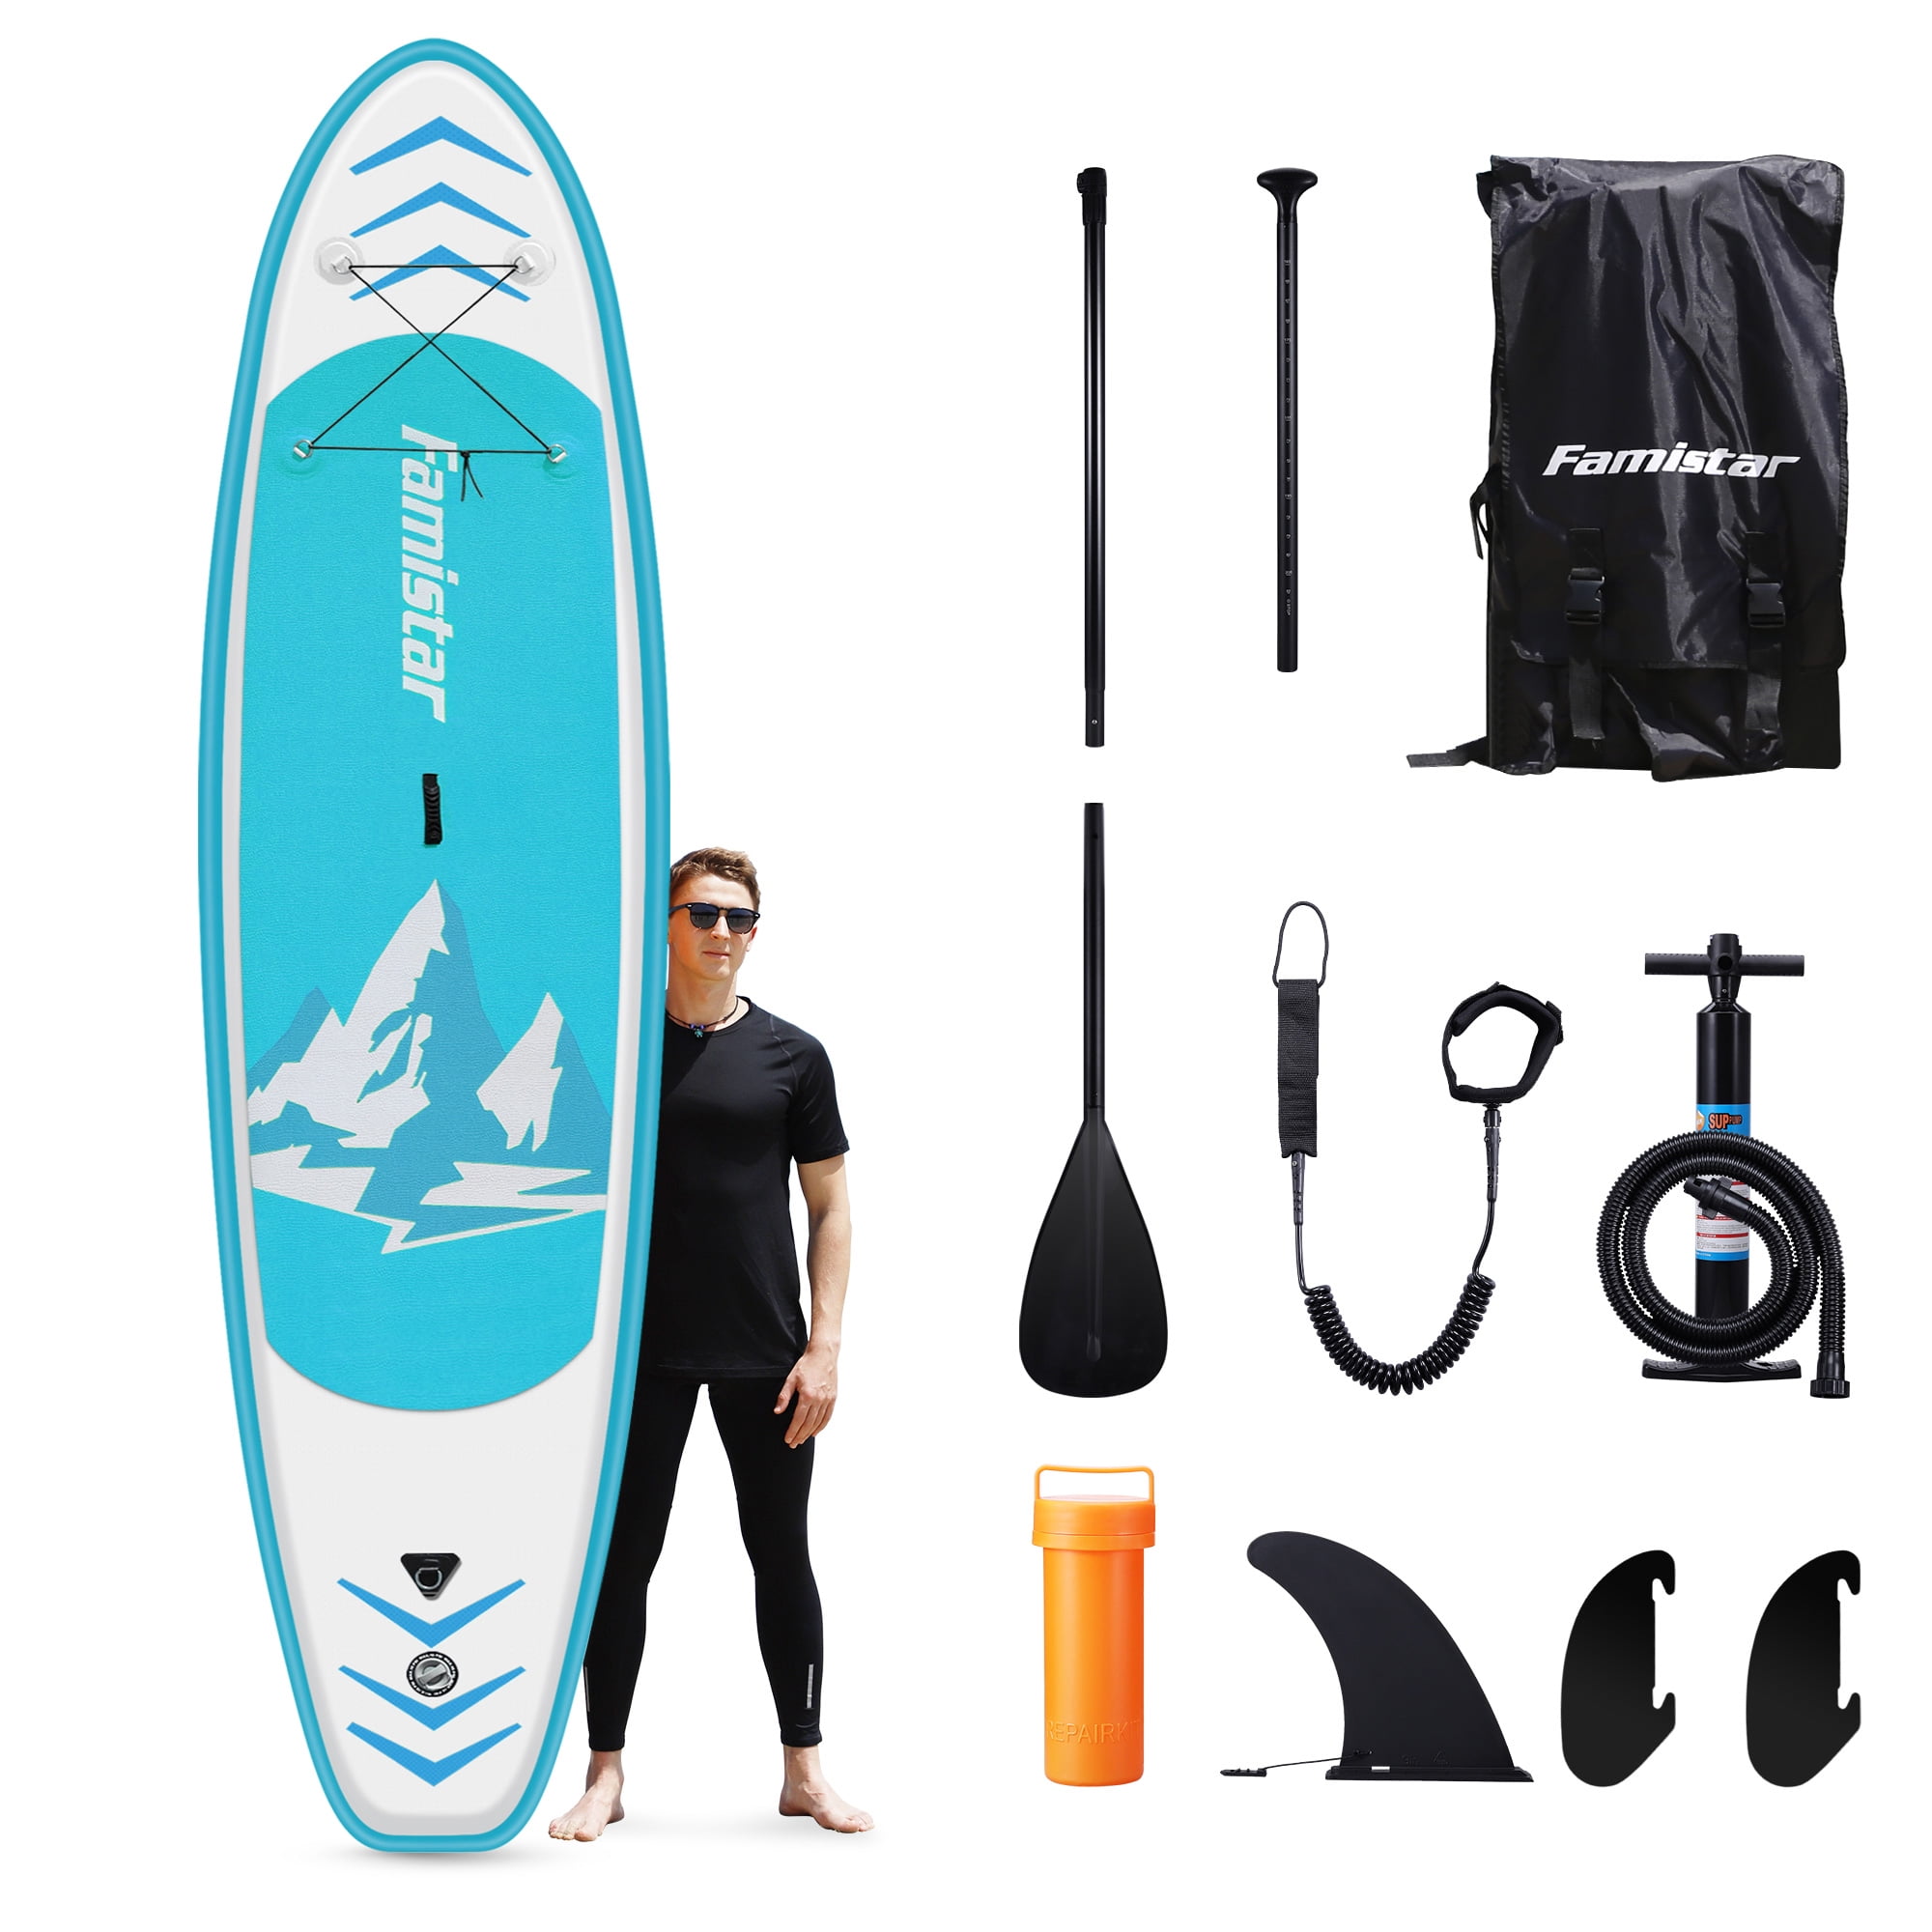 Famistar 10 Ft. 10 In. Inflatable Stand Up Paddle Board SUP with 3 Fins, Adjustable Paddle, Pump & Carrying Backpack